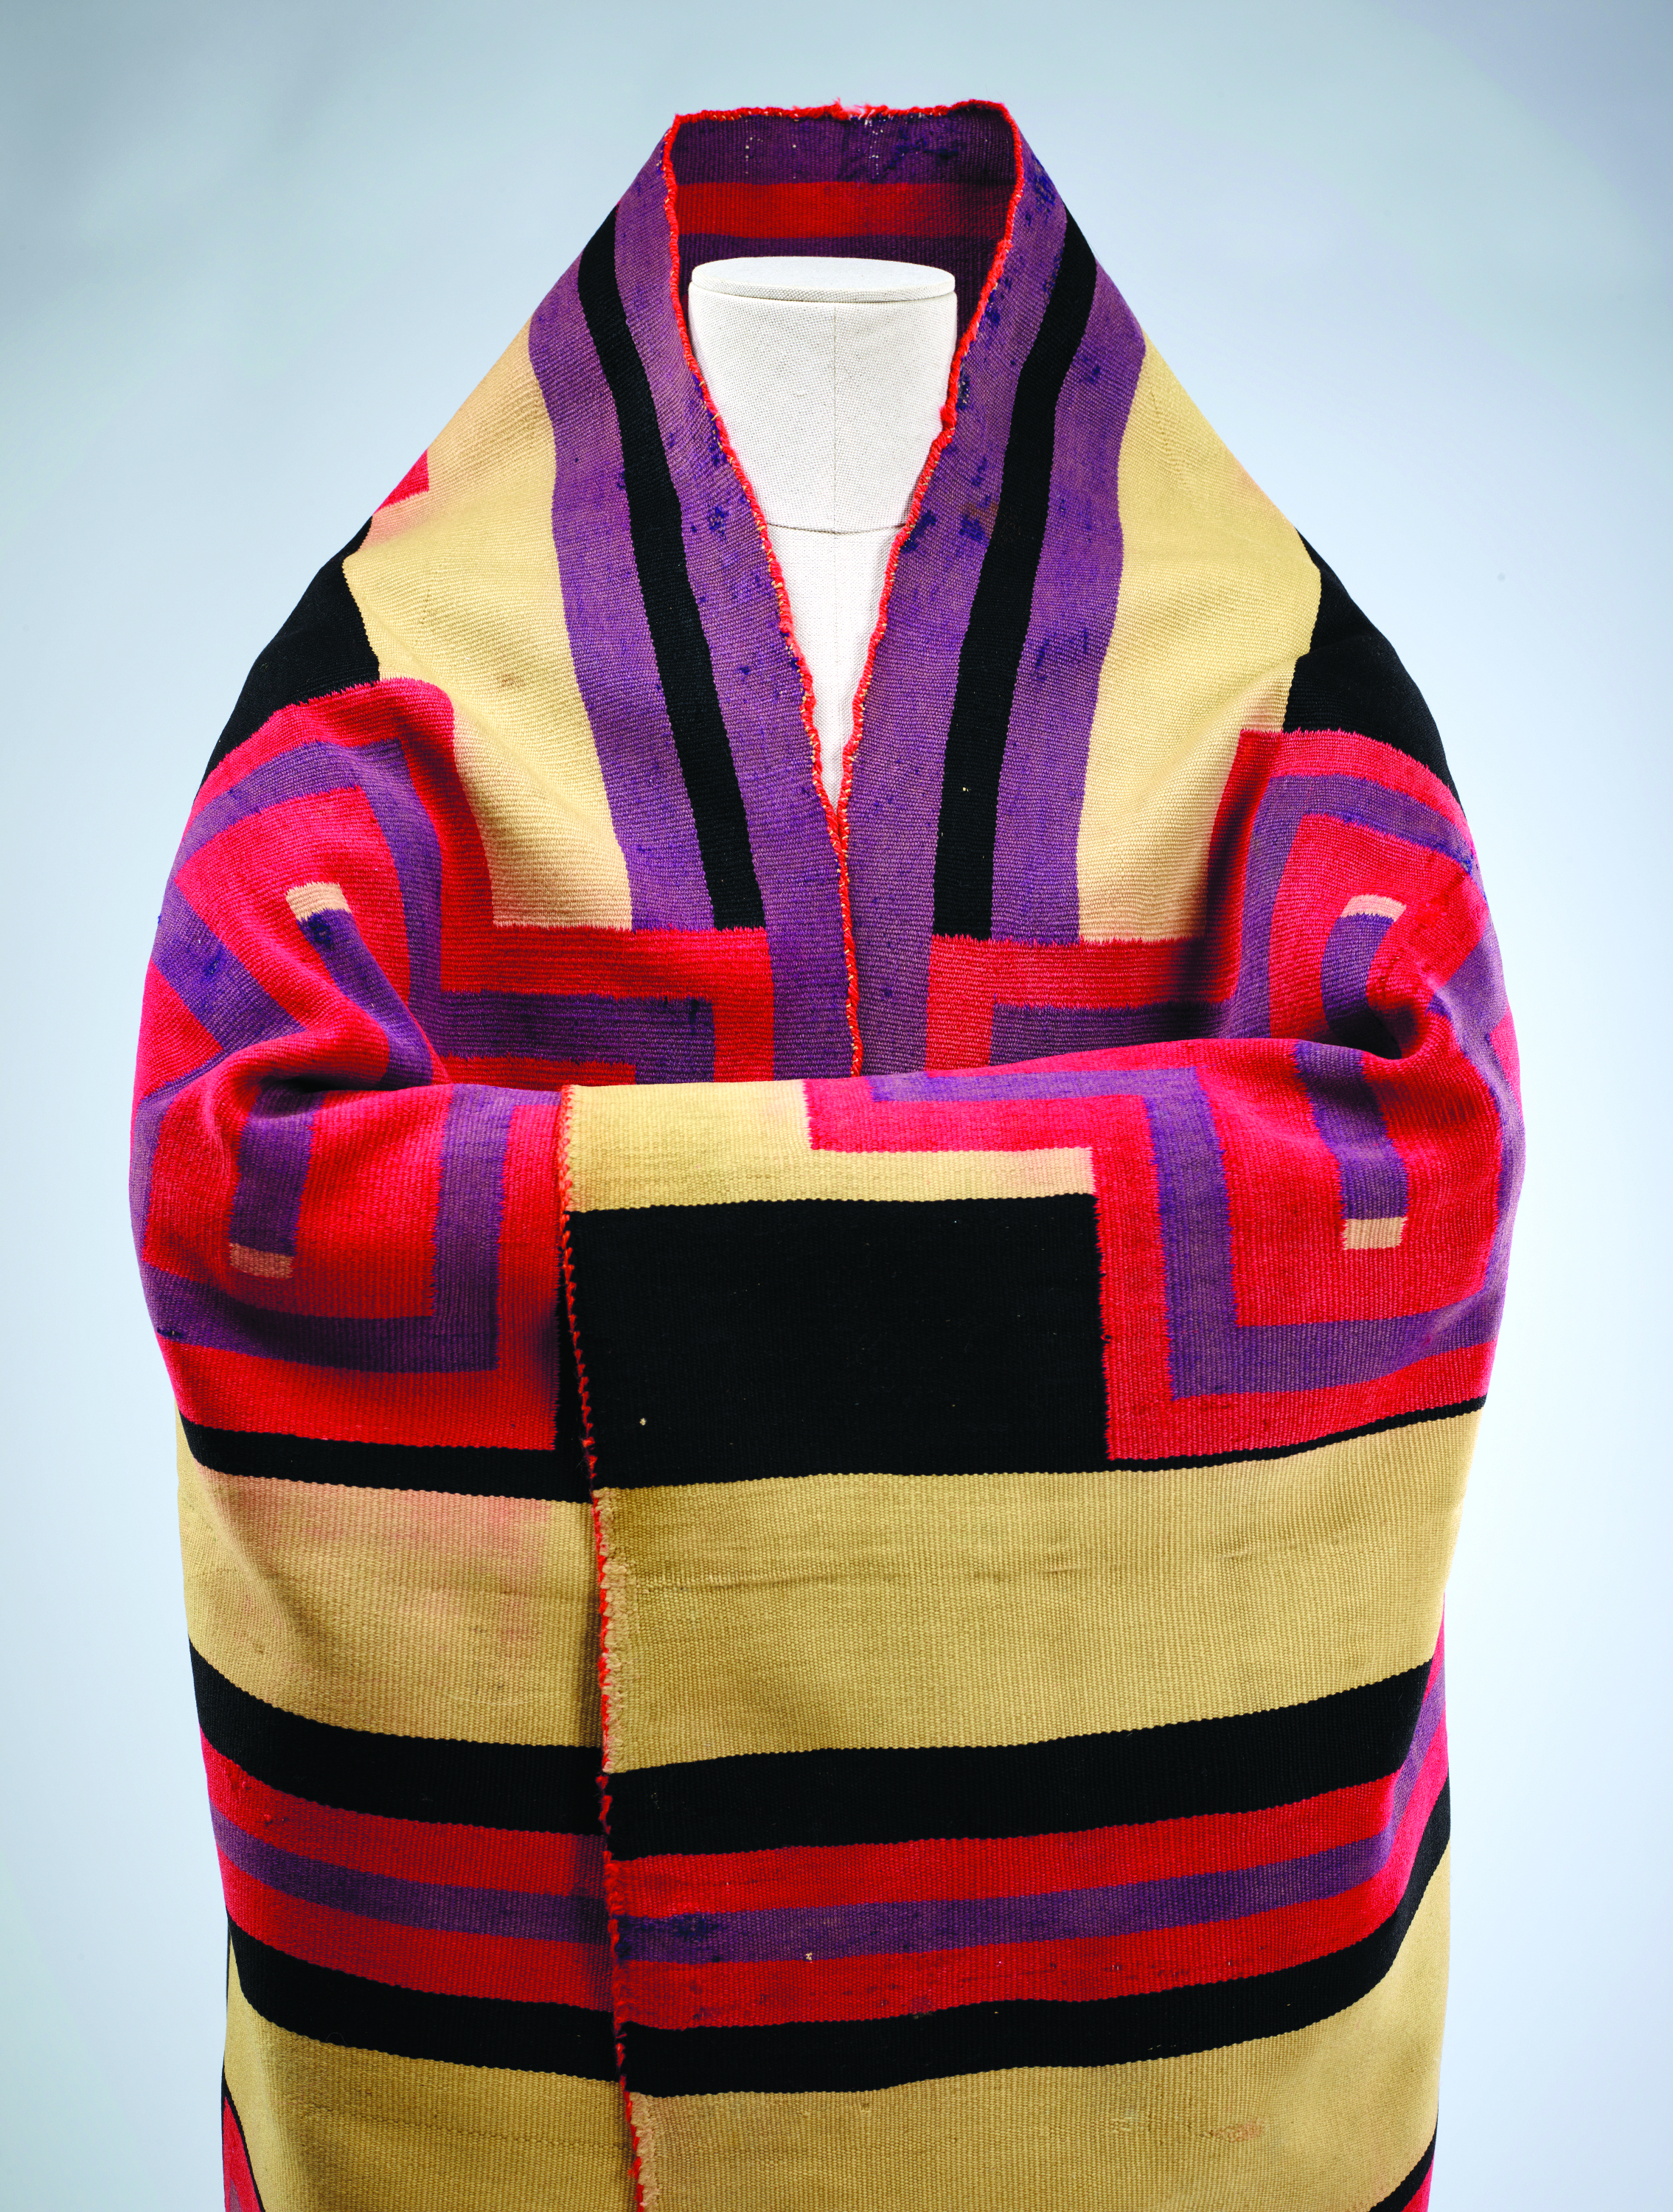 Chief-style blanket by Diné weaver, ca. 1880–1900 Gift of Mrs. Murray S. Danforth. Photo courtesy of RISD Museum